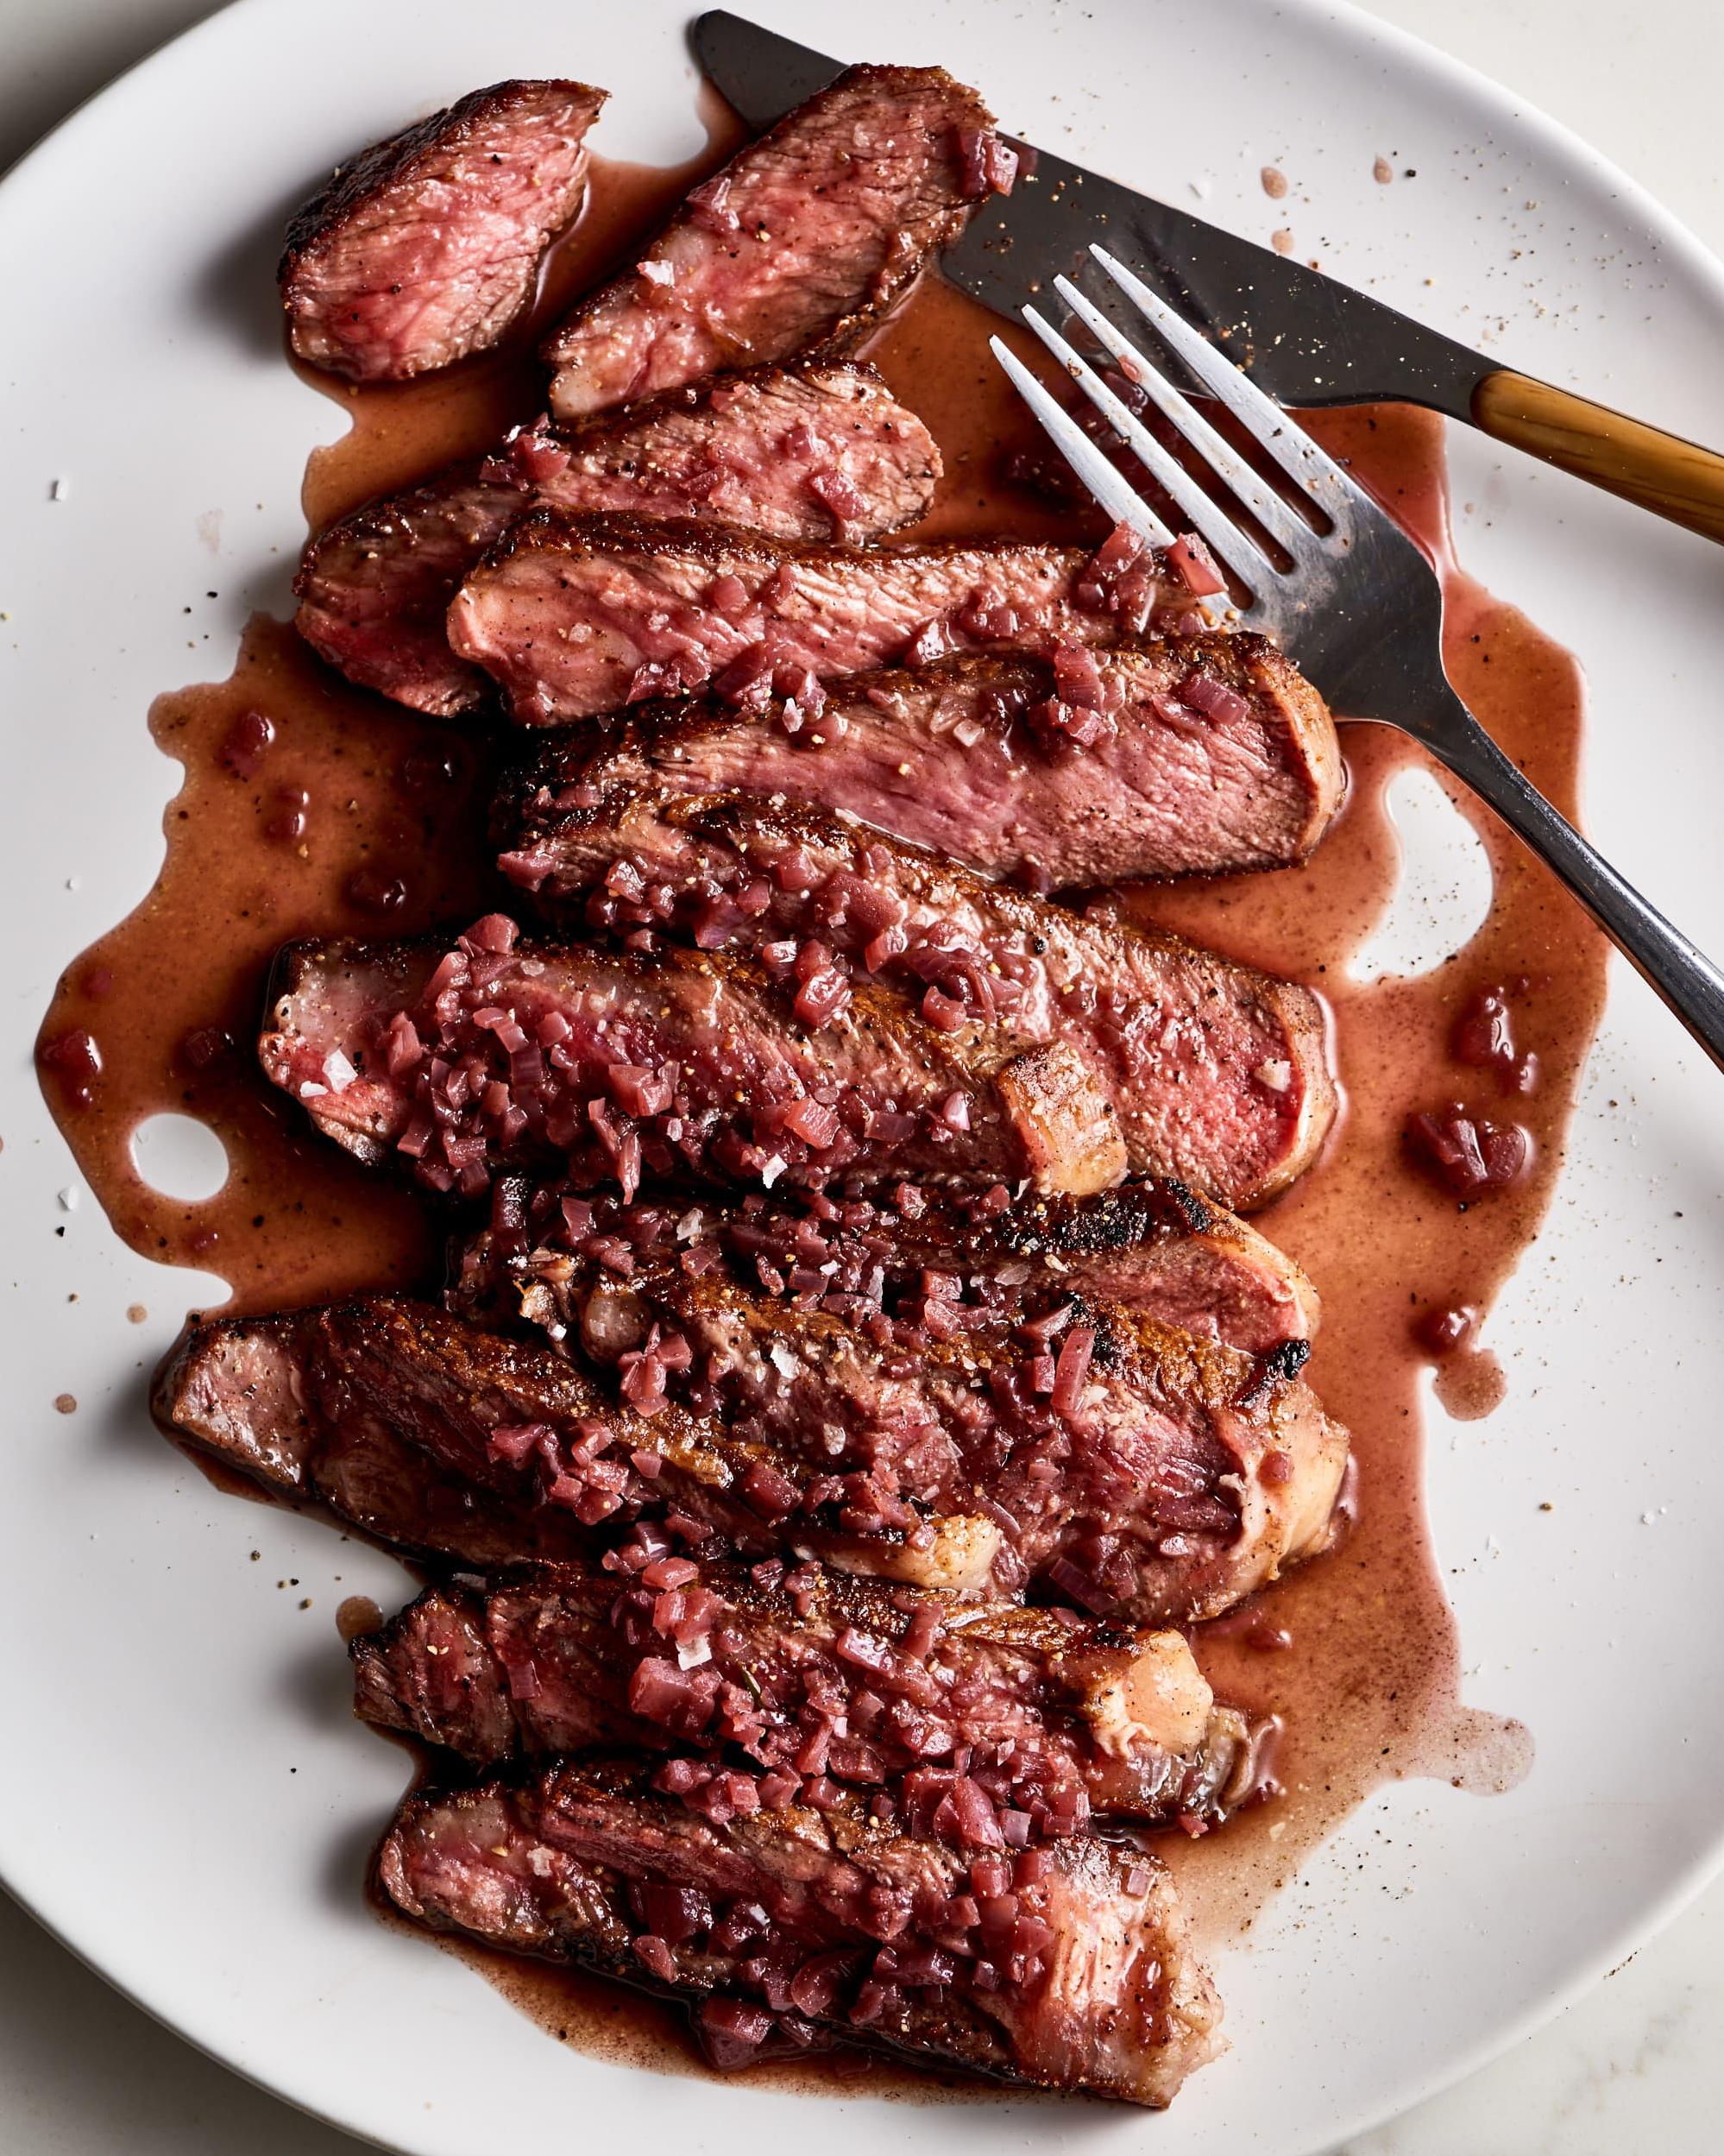  Get ready to impress your taste buds with tender, juicy steak in a savory wine sauce